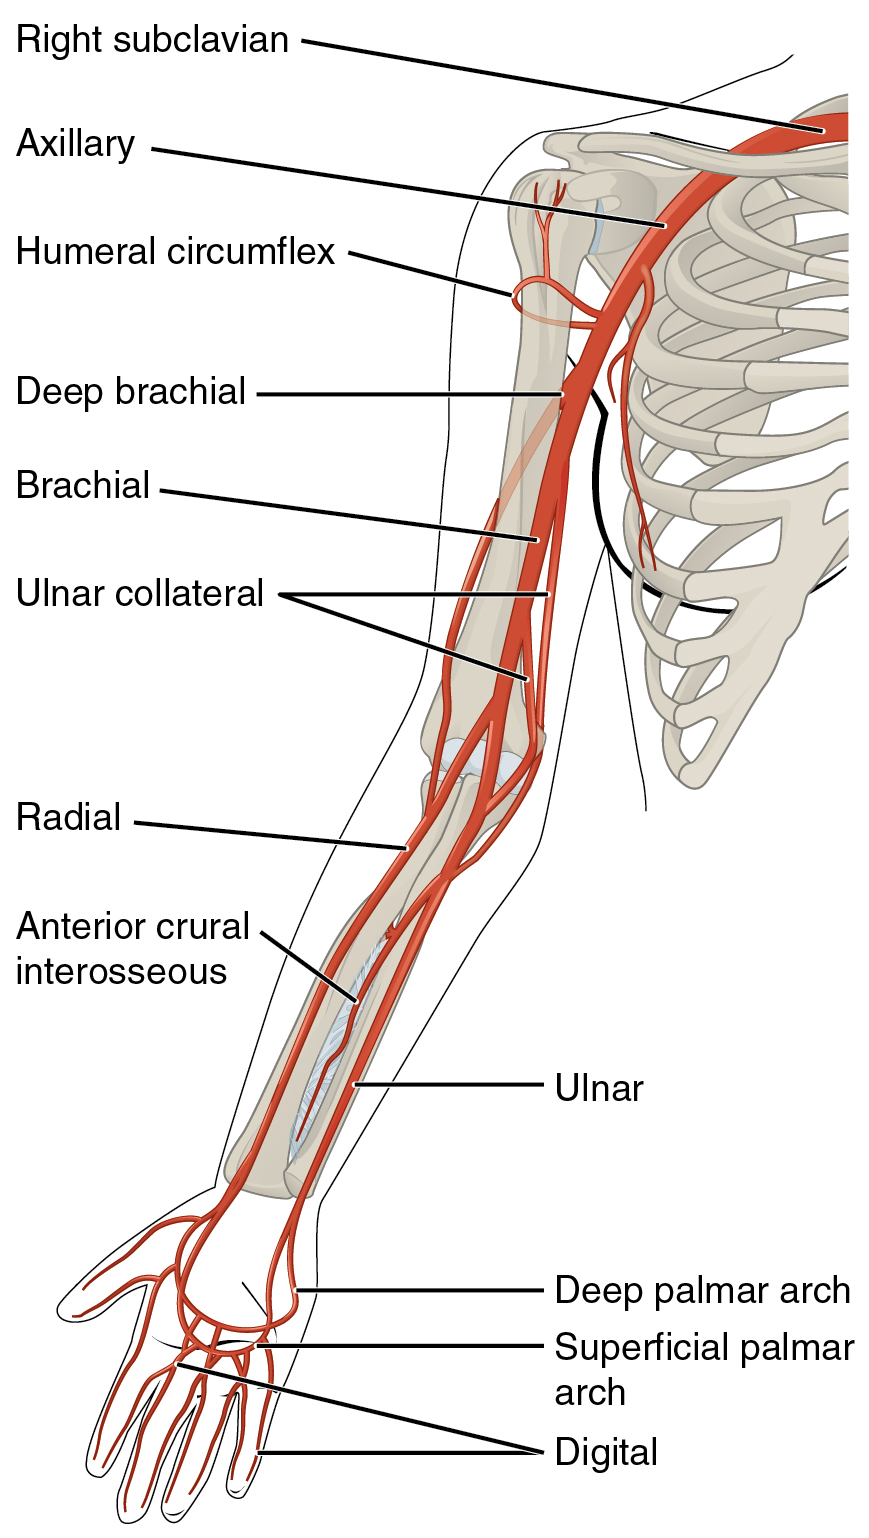 Labeled diagram of arteries serving the upper limb.